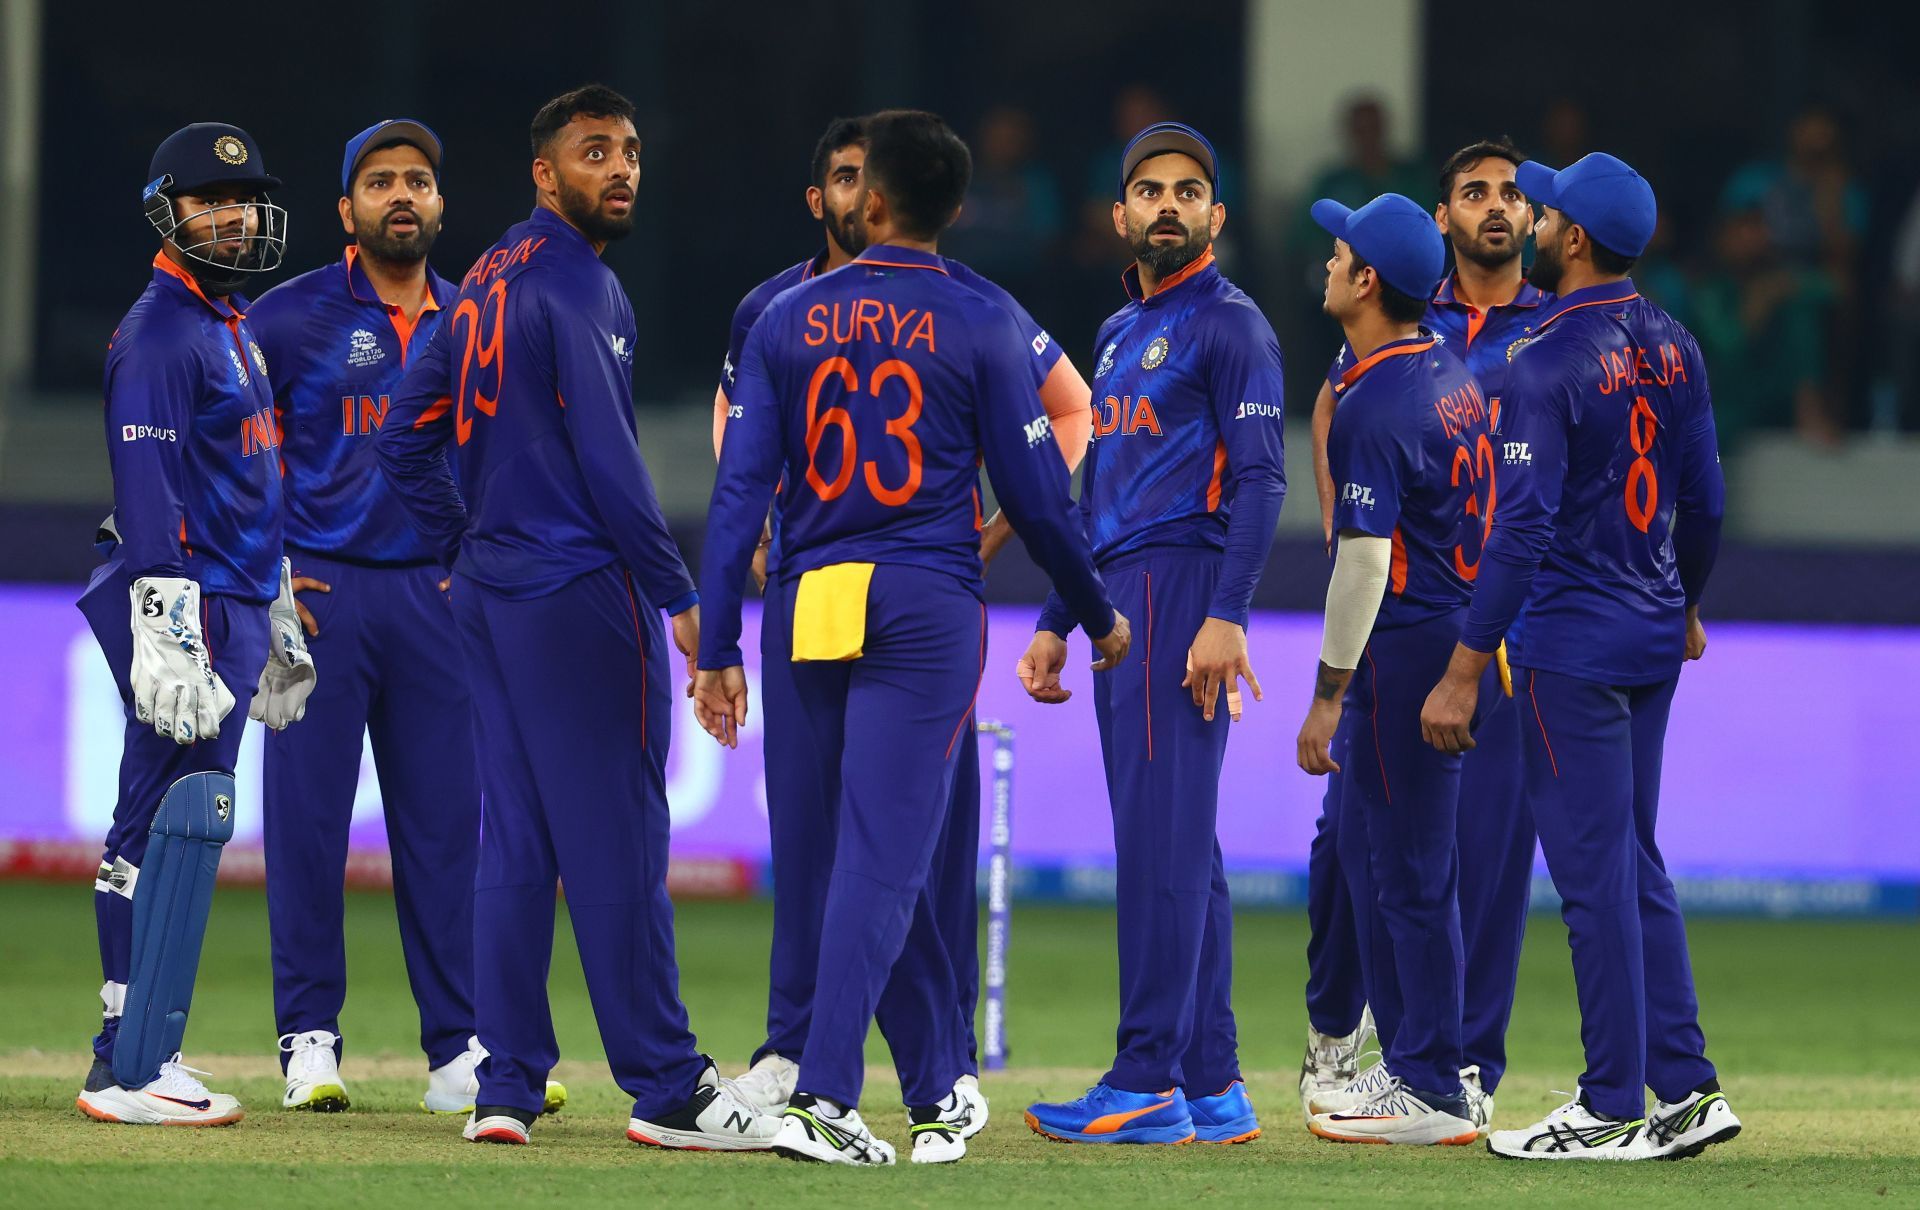 Team India made some questionable calls during their match against New Zealand